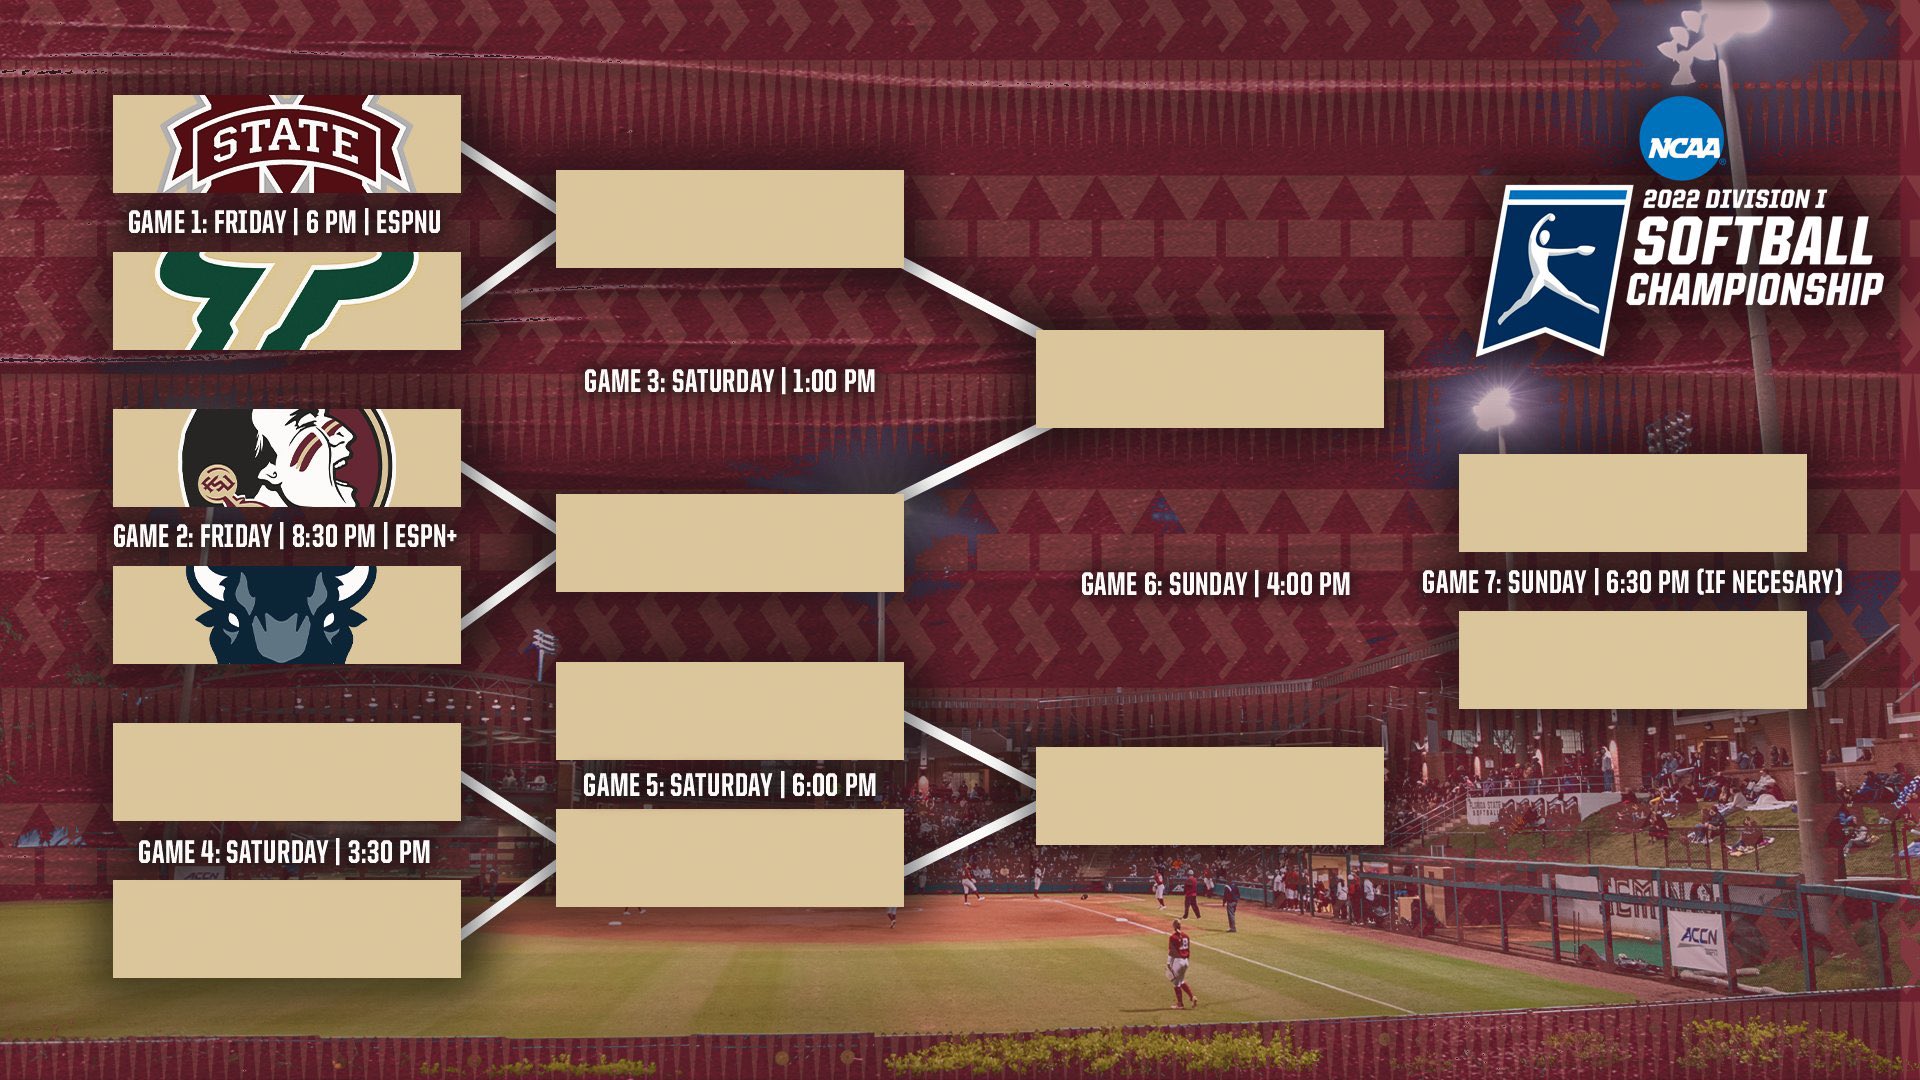 Florida State Softball 🥎 on Twitter: "Check out the schedule for this